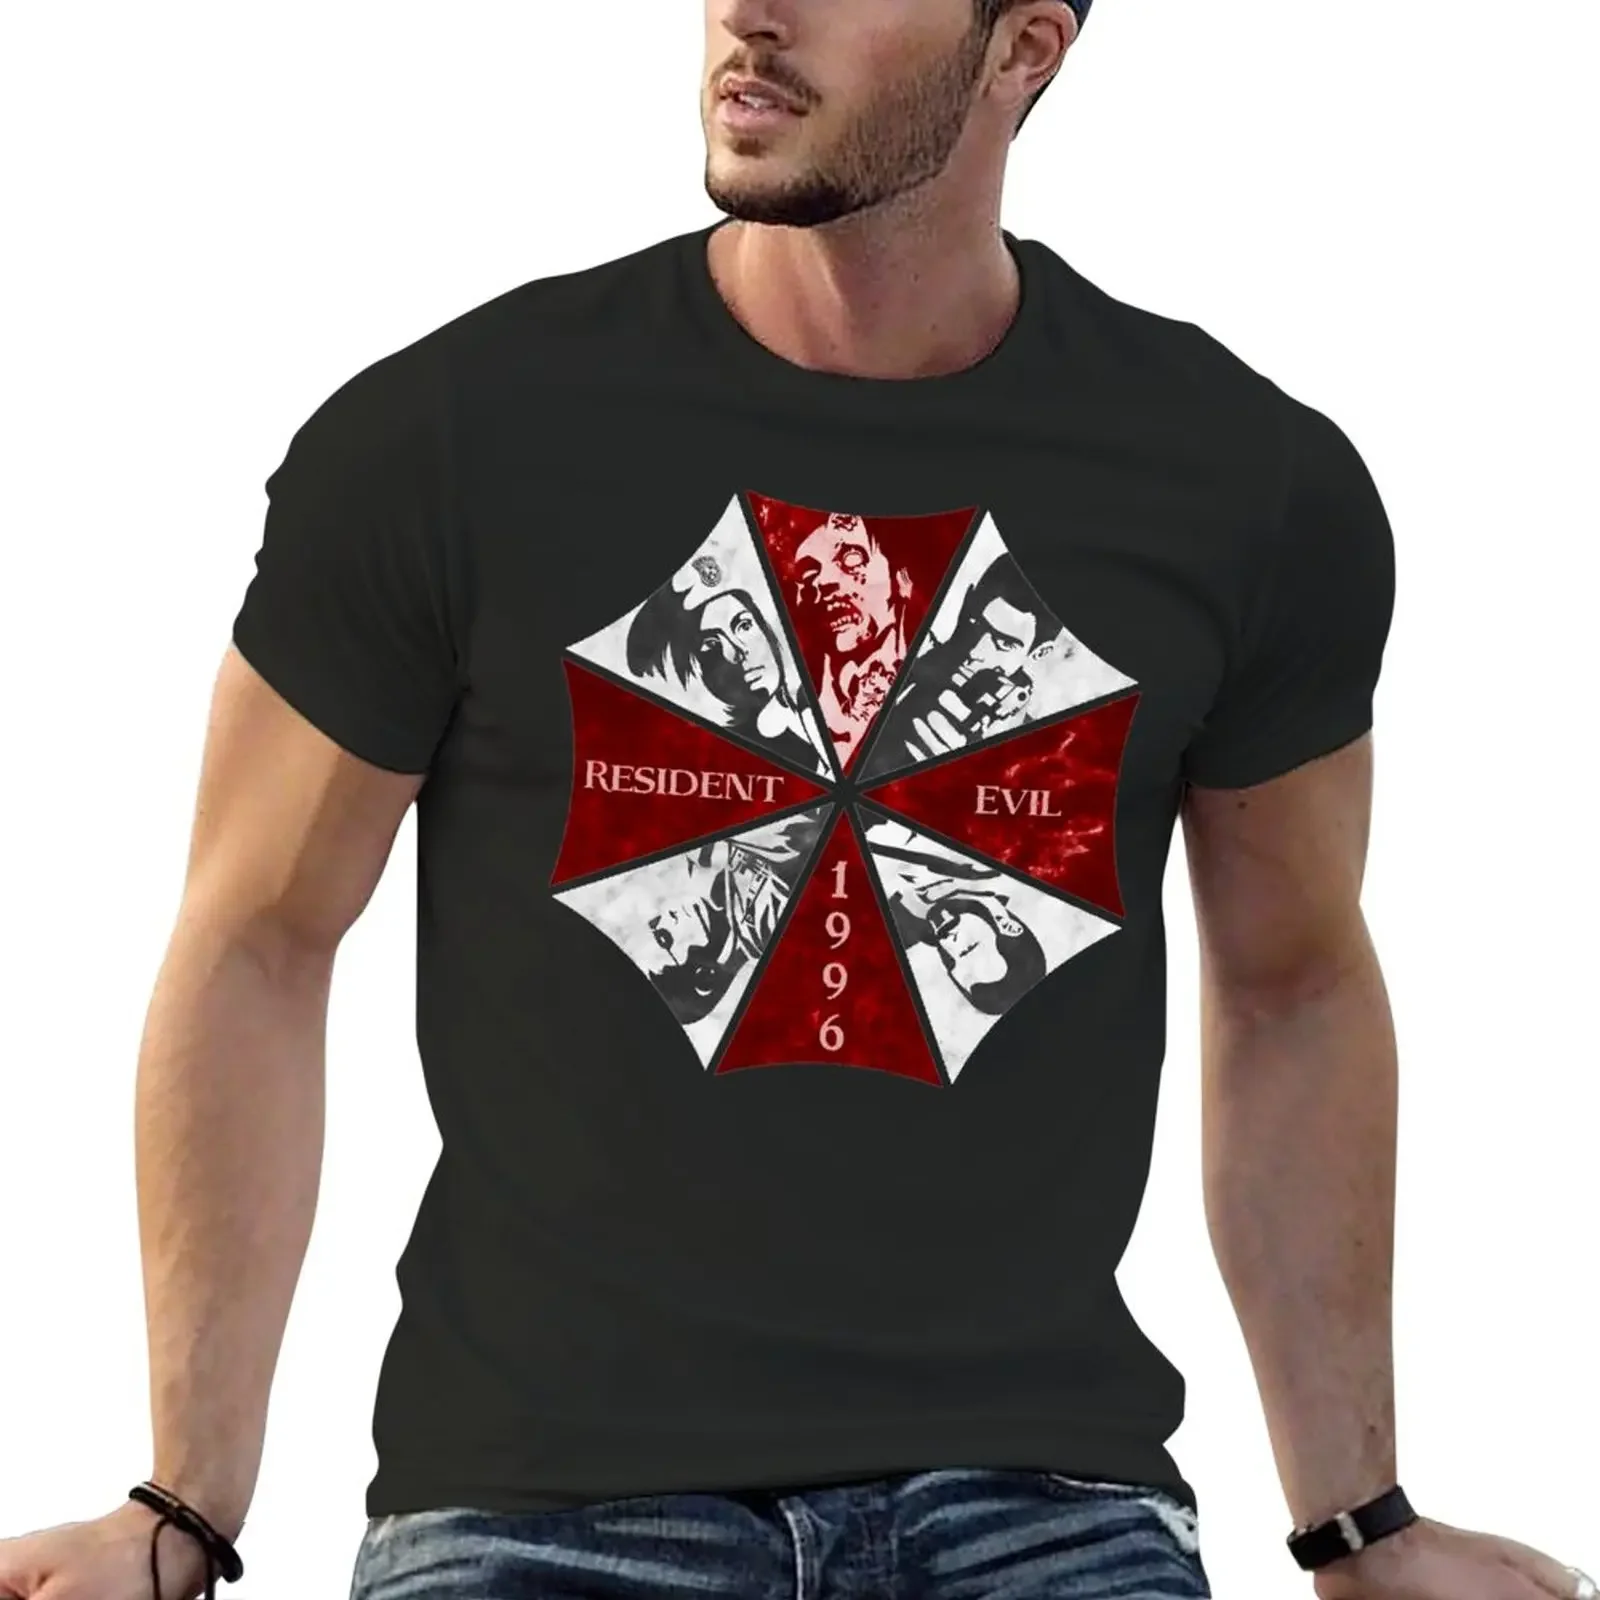 

Umbrella Corp. T-Shirt oversizeds tops Aesthetic clothing mens graphic t-shirts